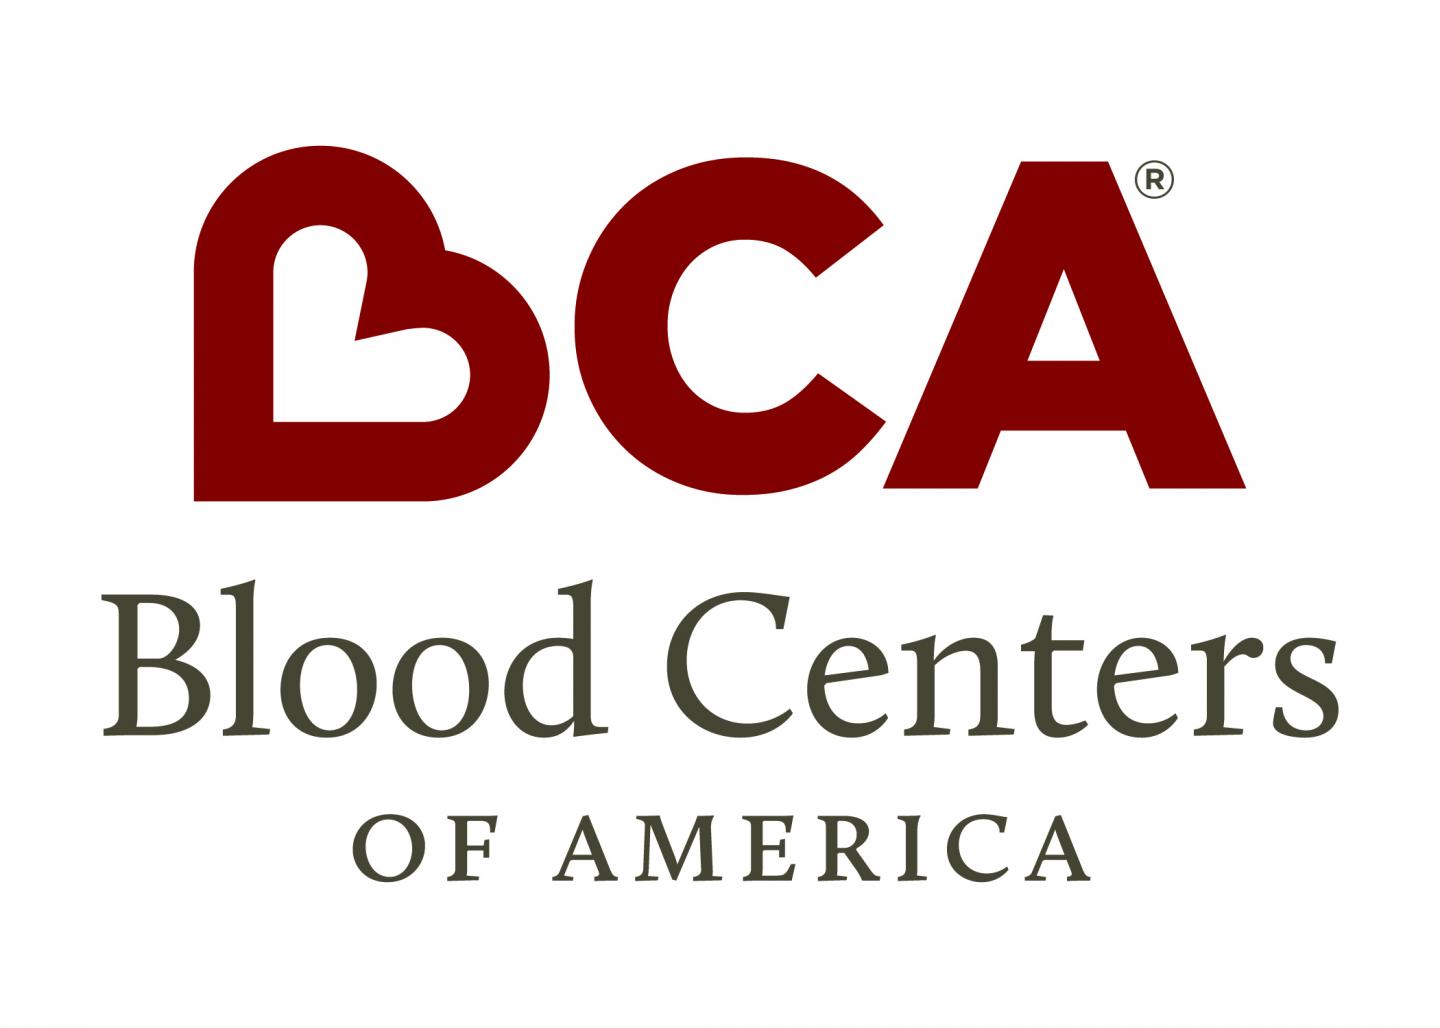 Blood Centers of America